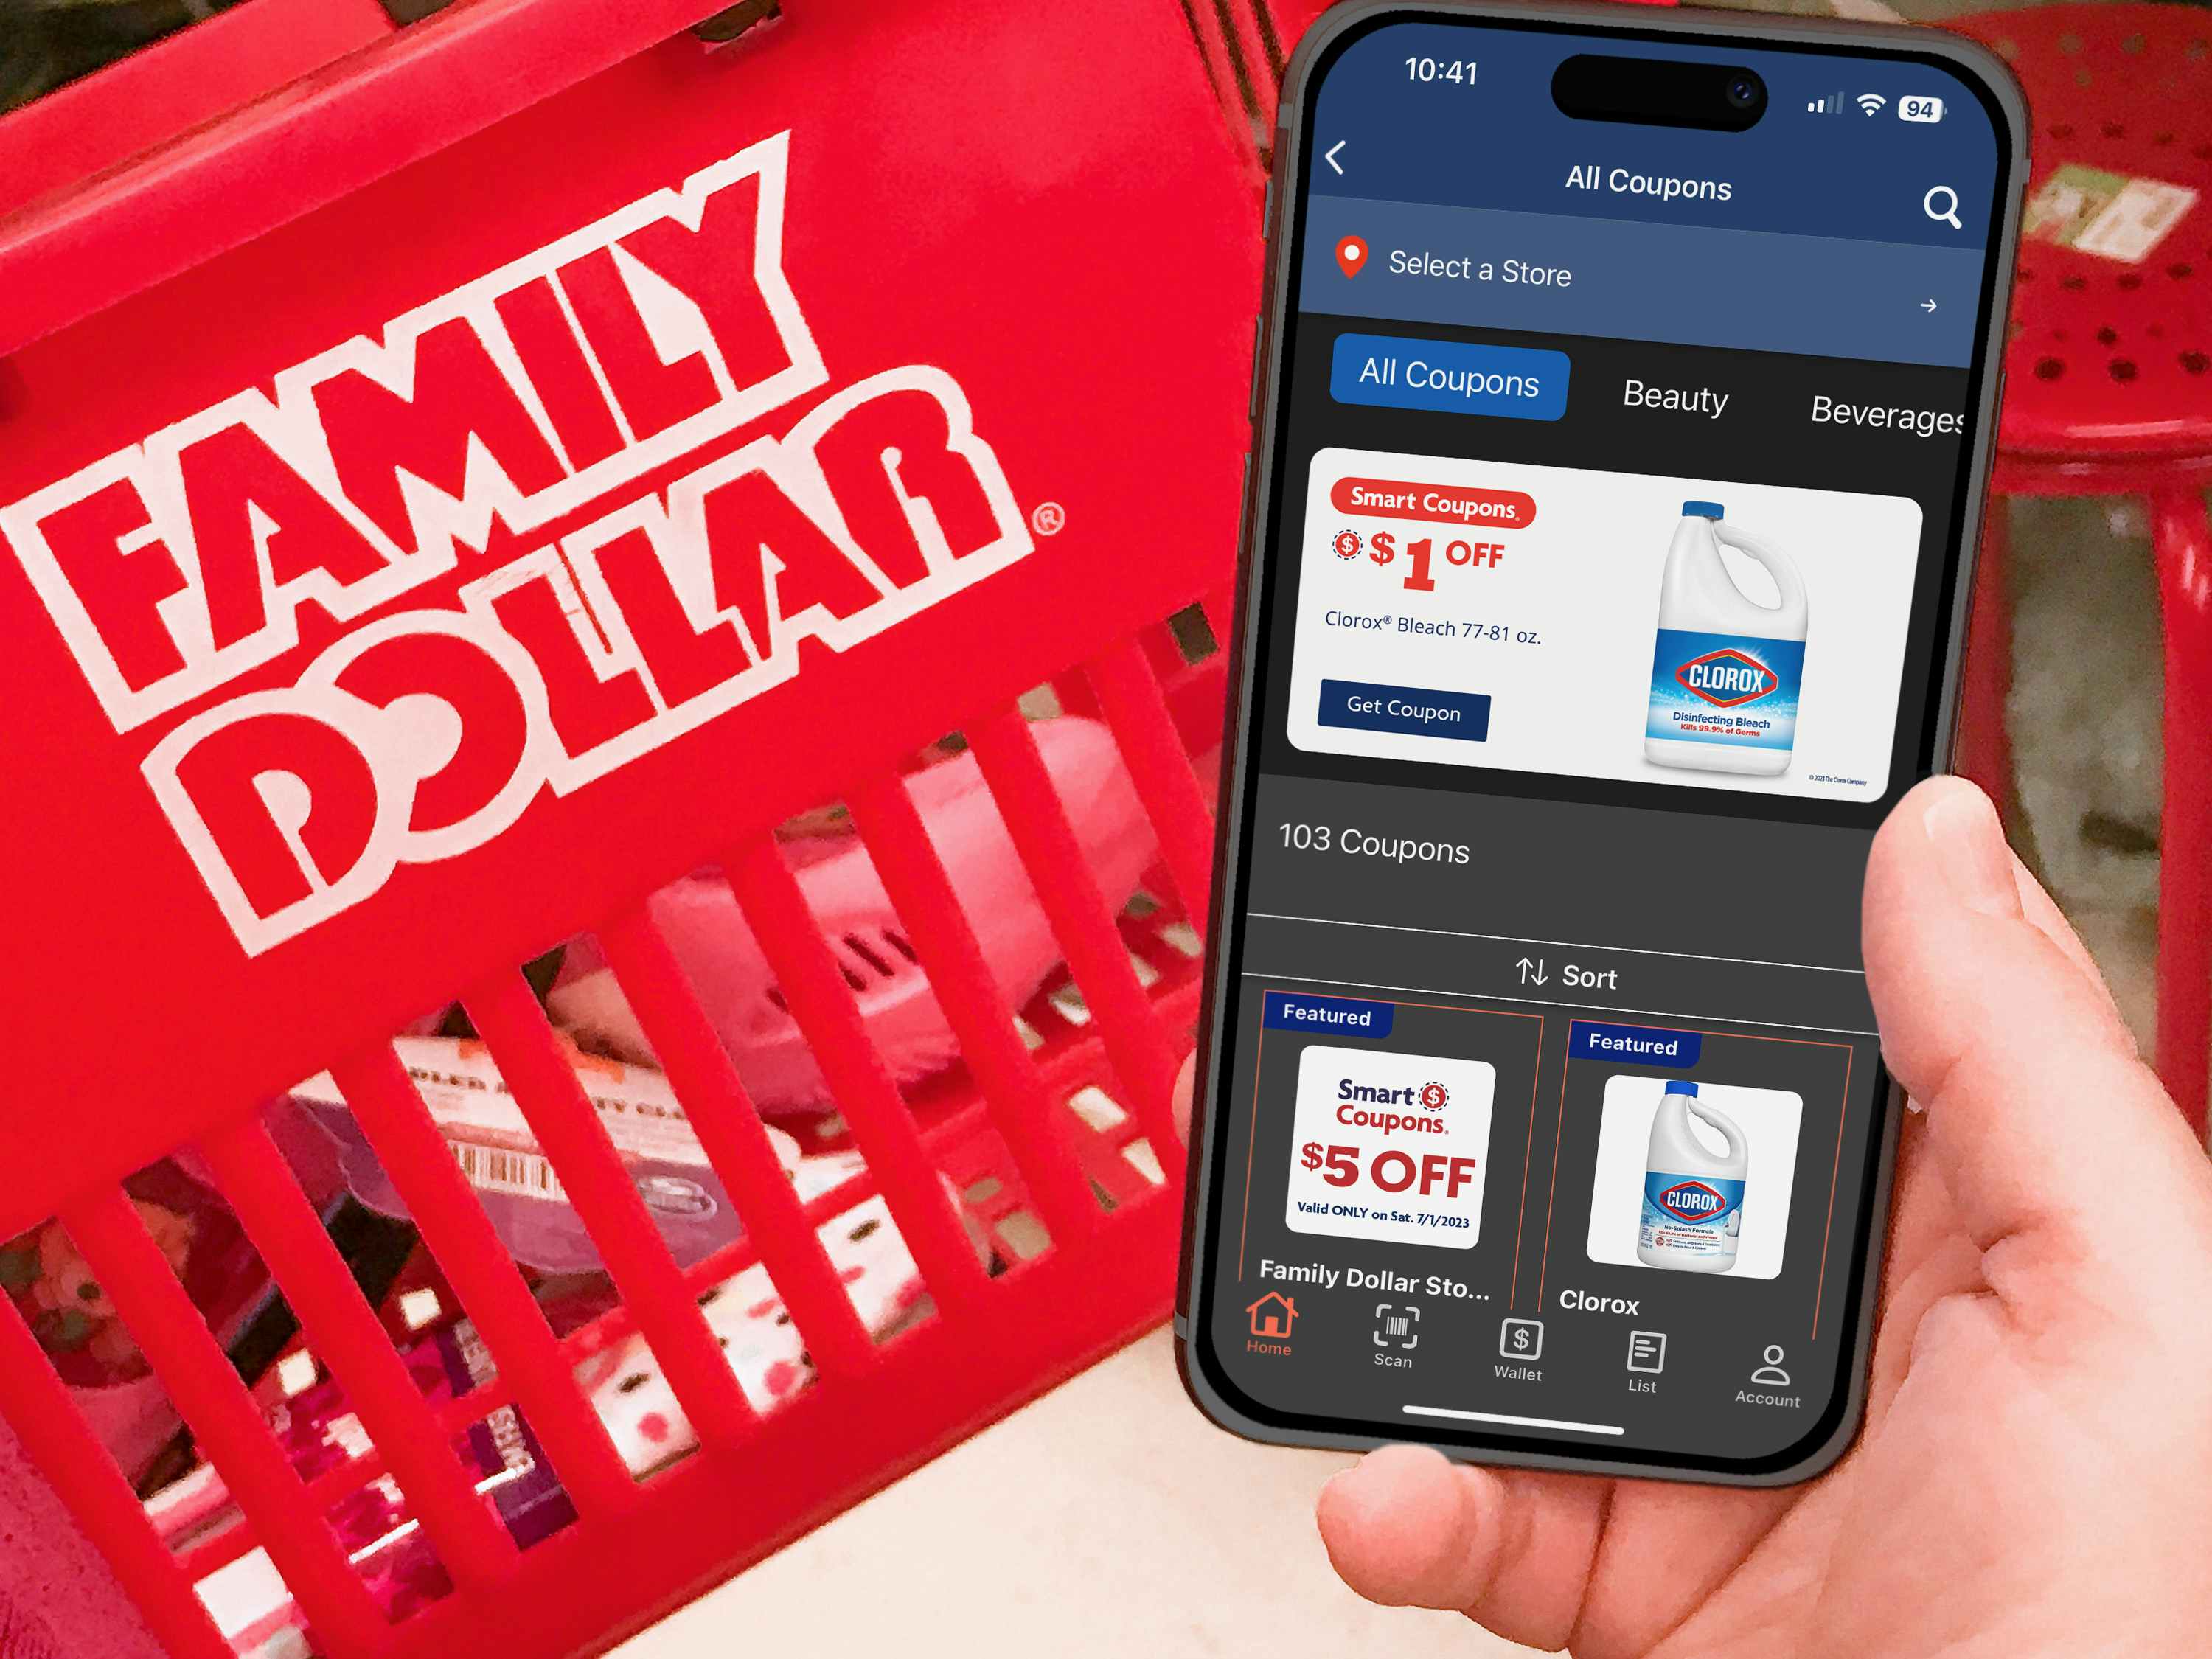 https://prod-cdn-thekrazycouponlady.imgix.net/wp-content/uploads/2023/01/digital-grocery-coupons-family-dollar-app-reuploaded-updated-screenshot-1687965104-1687965104.jpg?auto=format&fit=fill&q=25